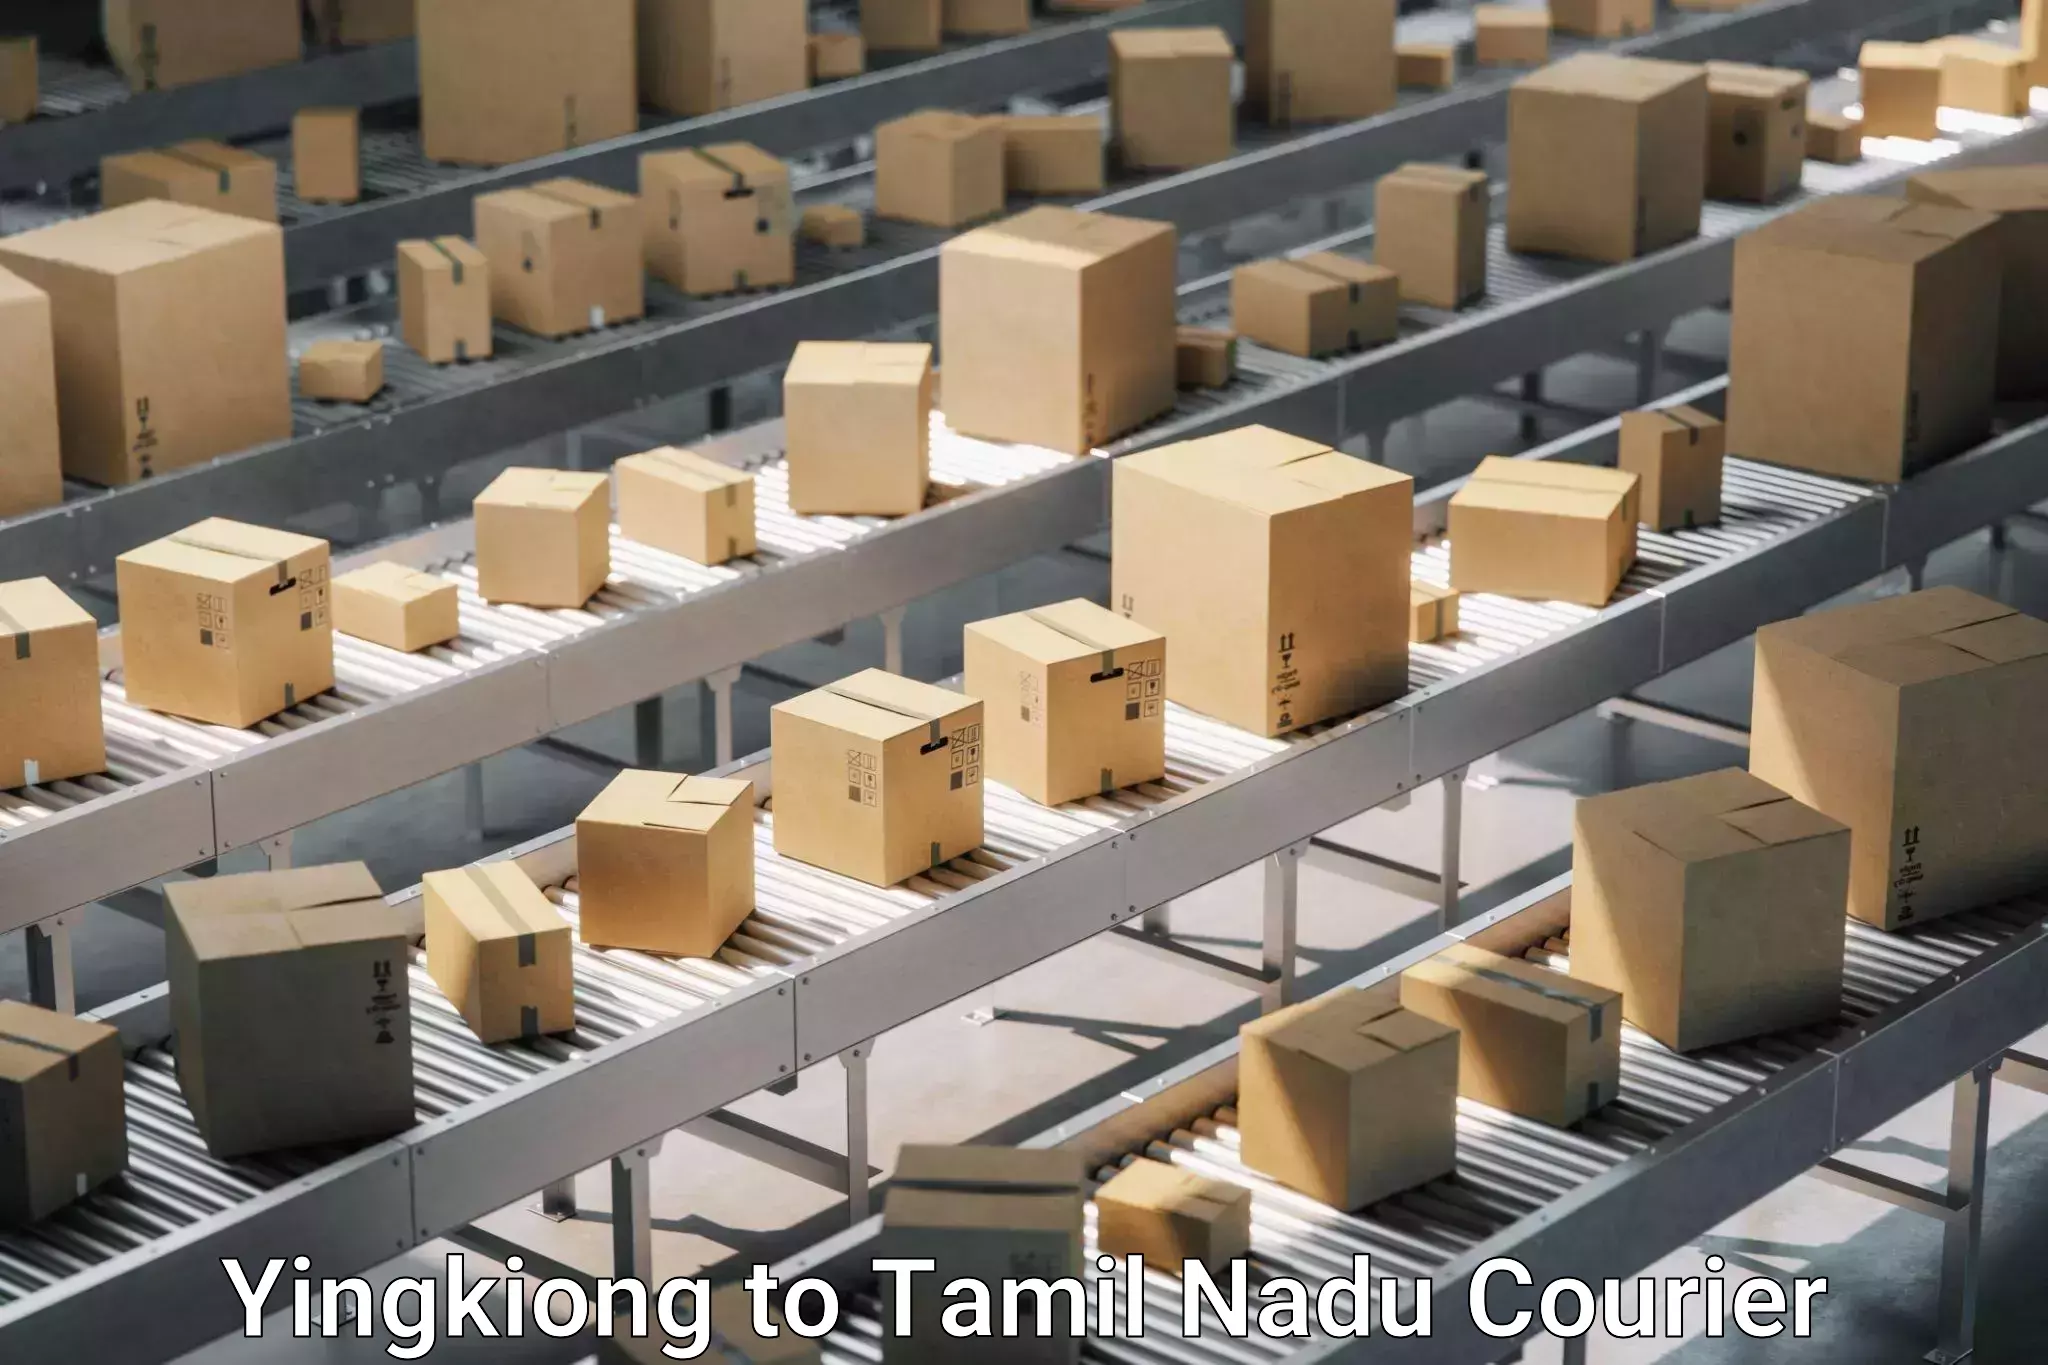 Moving and packing experts Yingkiong to Tamil Nadu